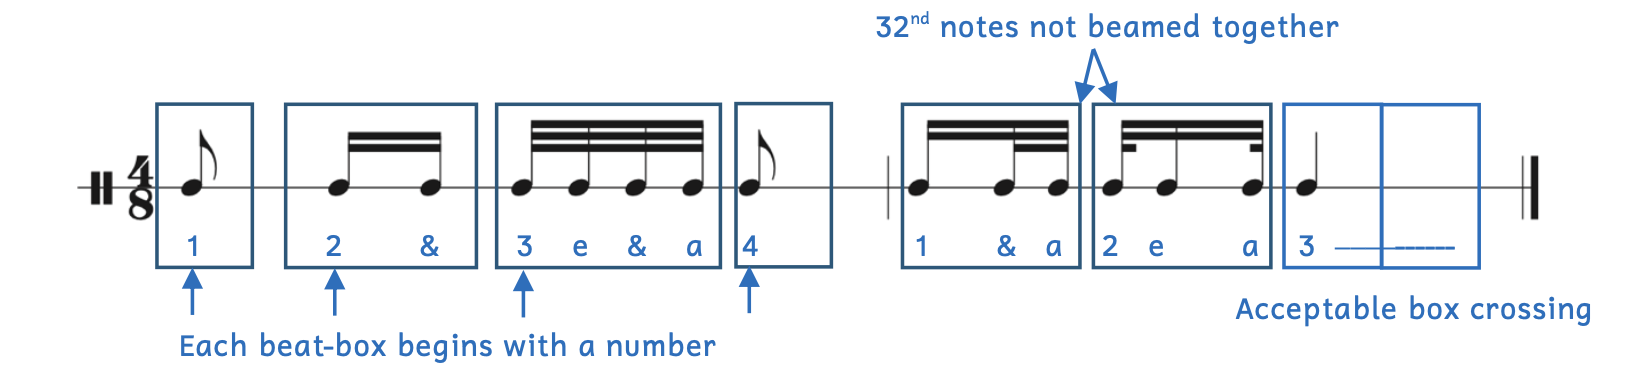 Boxing beats to help read music. Each beat-box begins with a number. Notes are note beamed across beat-boxes. Notes can be held out beyond beat boxes when they begin on a strong or less strong beat.